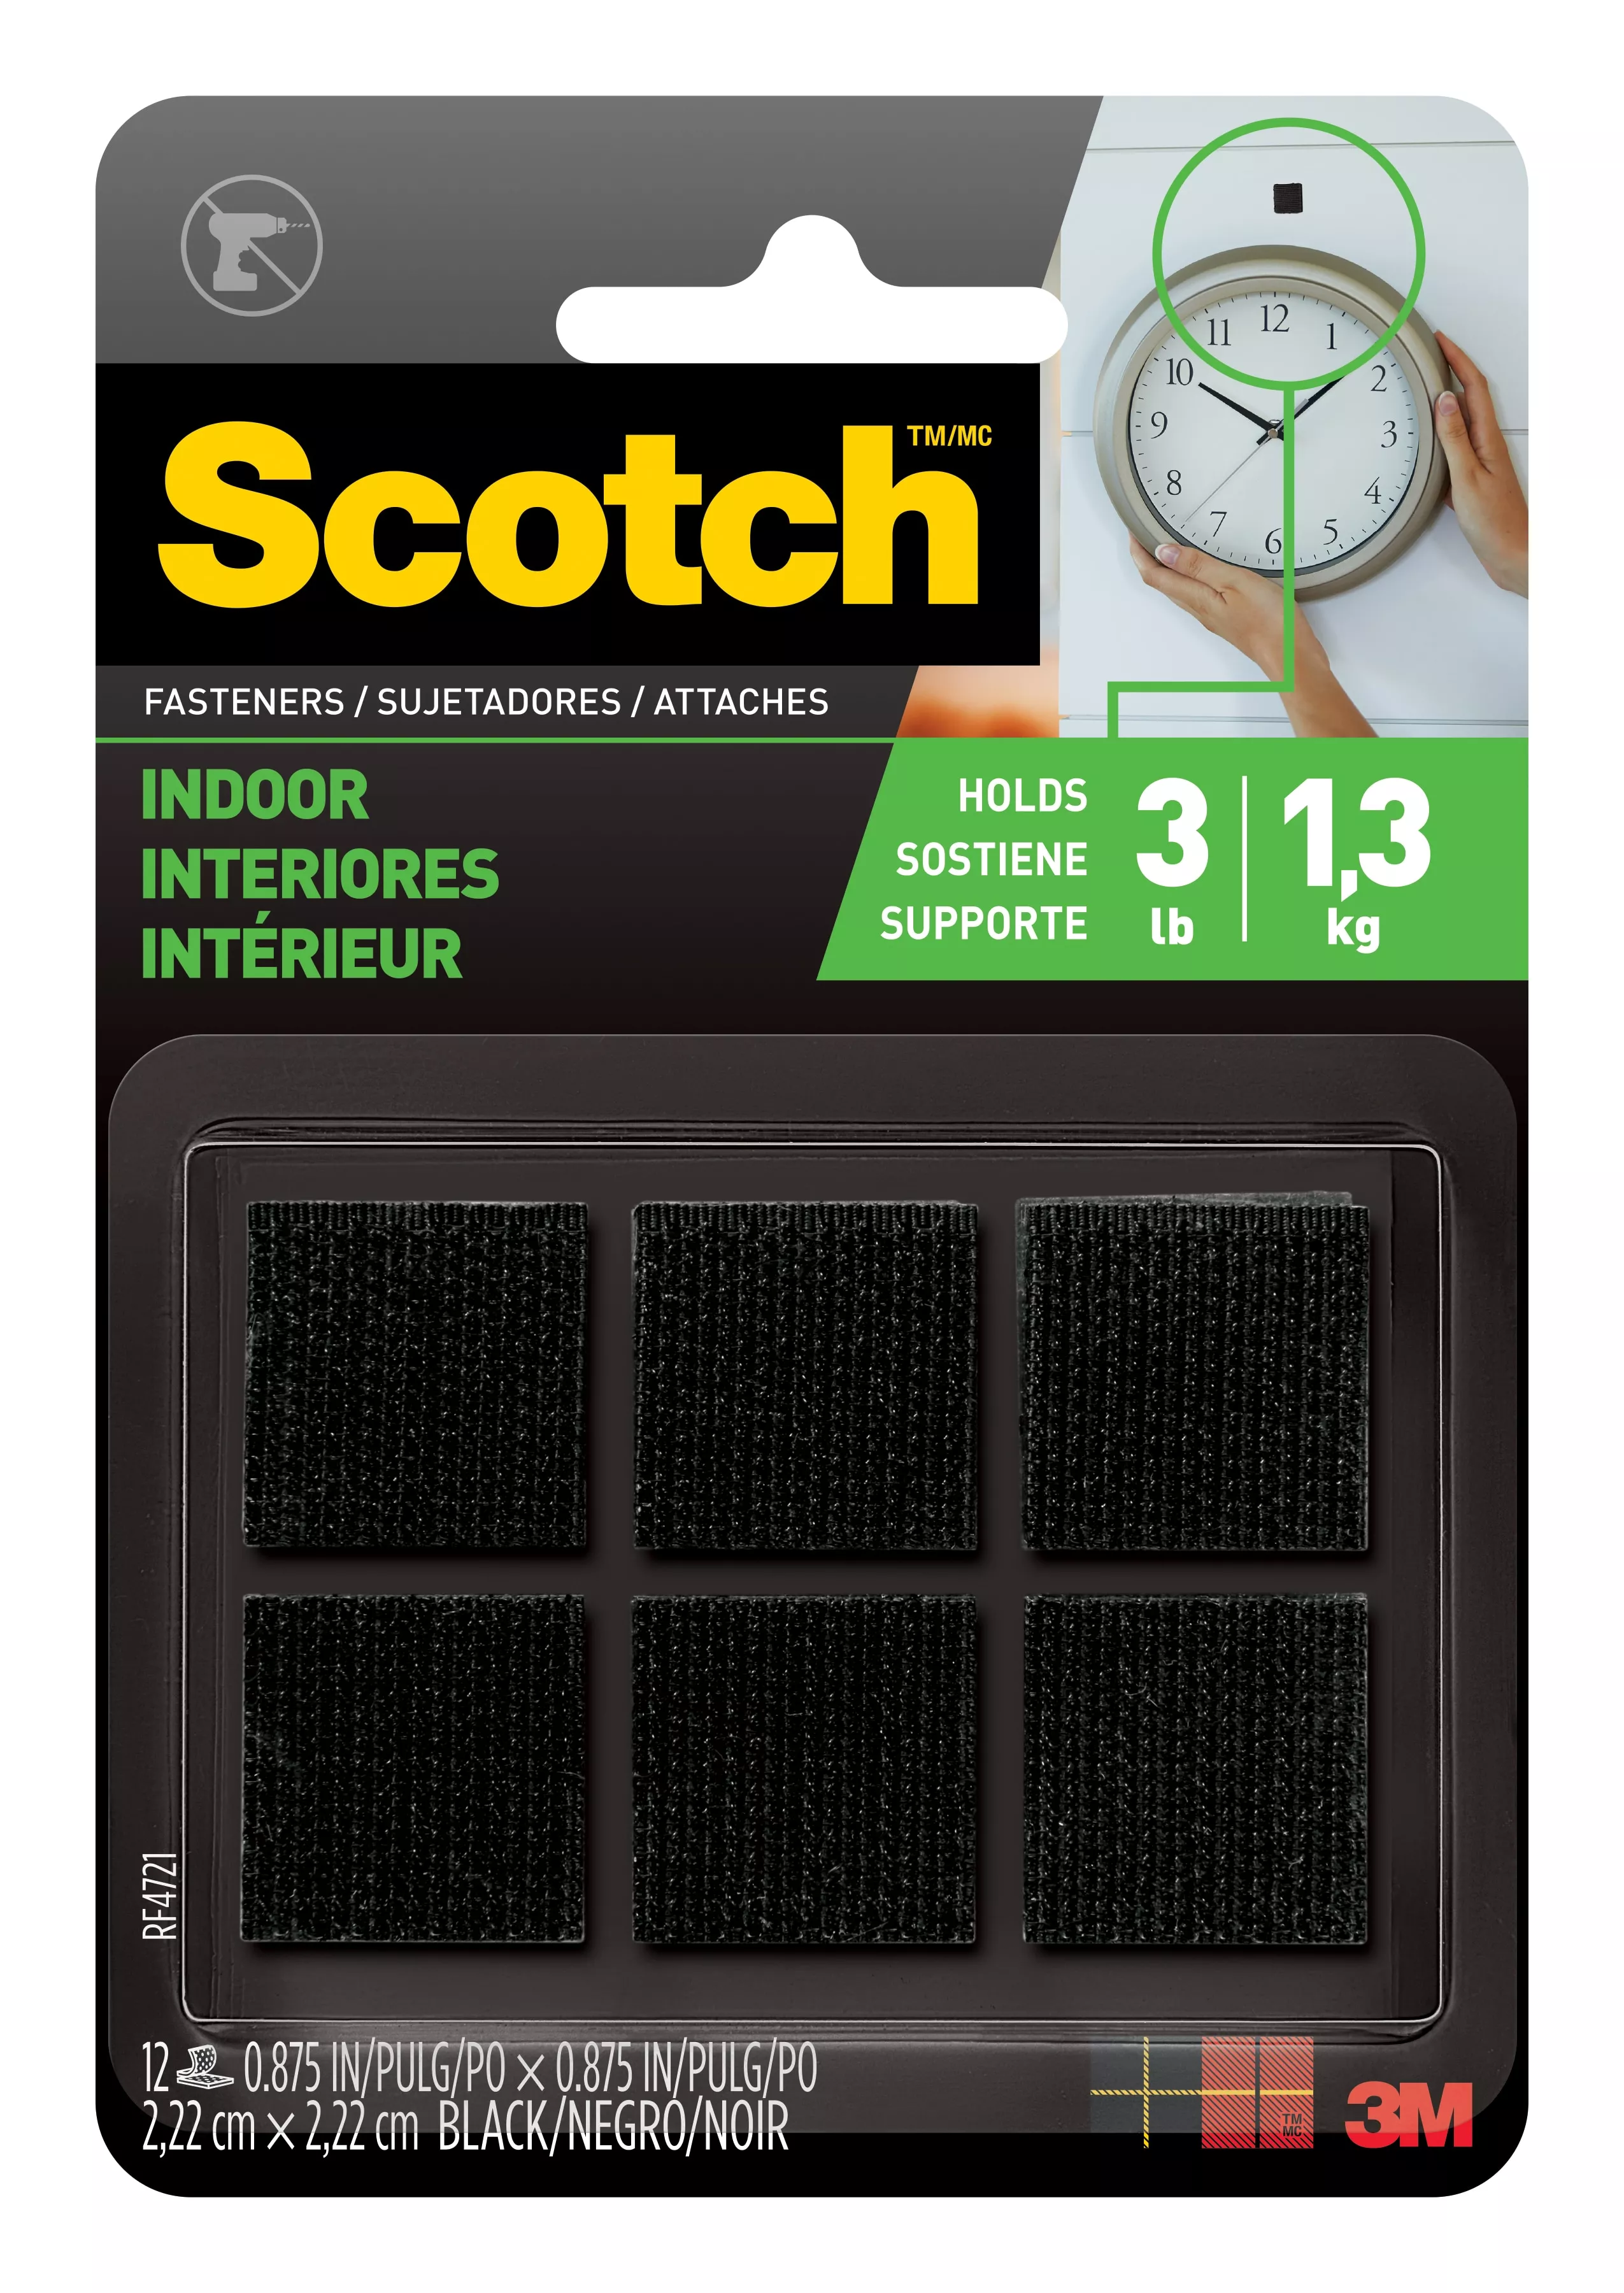 Scotch™ Indoor Fasteners, RF4721, 7/8 in x 7/8 in (2,22 cm x 2,22 cm),
Black, 12 Sets of Squares